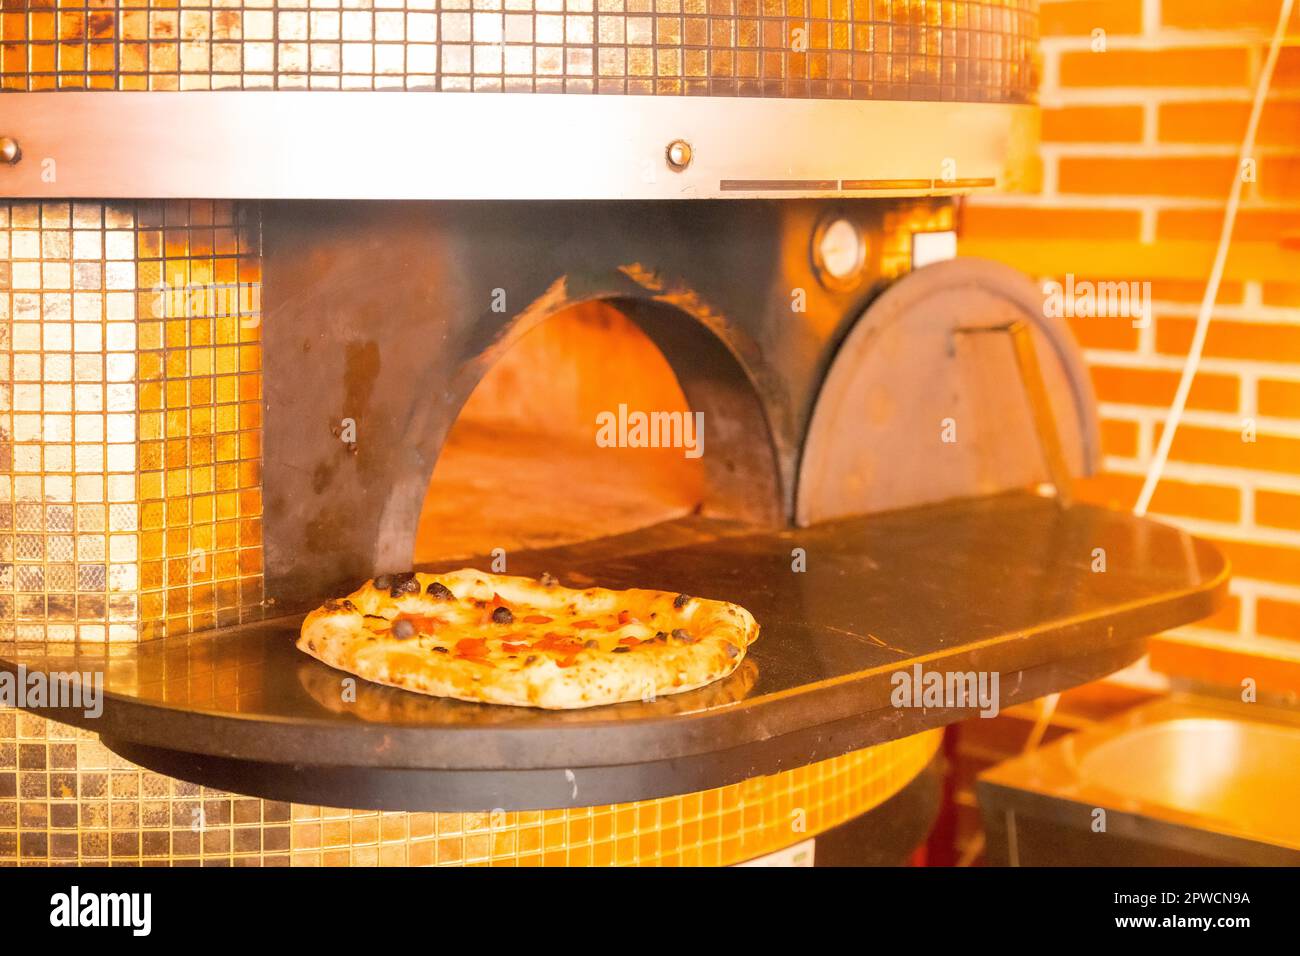 Artisan pizza oven. Pizza fresh out of the oven, pizza hot and ready for customers Stock Photo